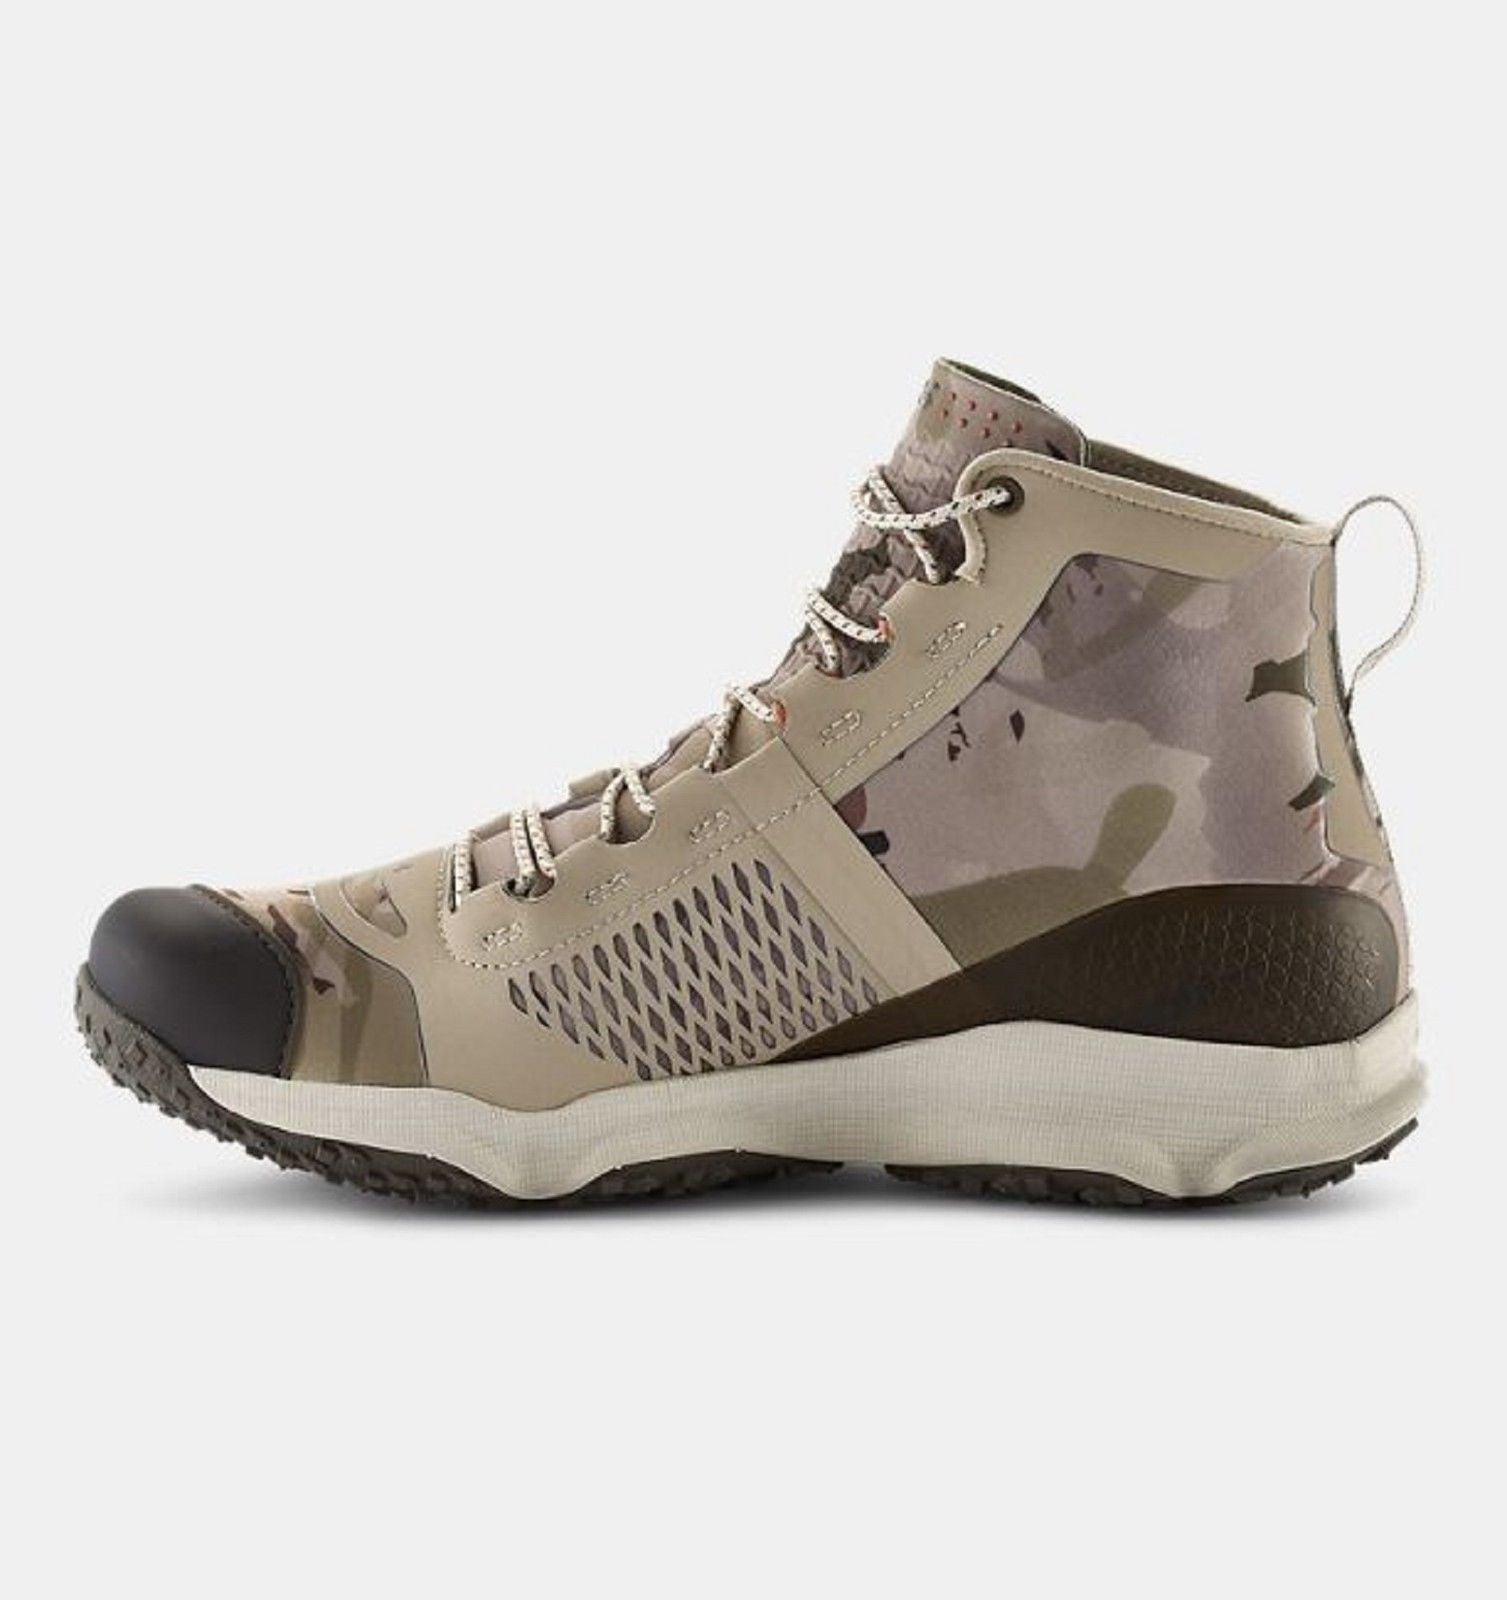 mens under armour hiking boots